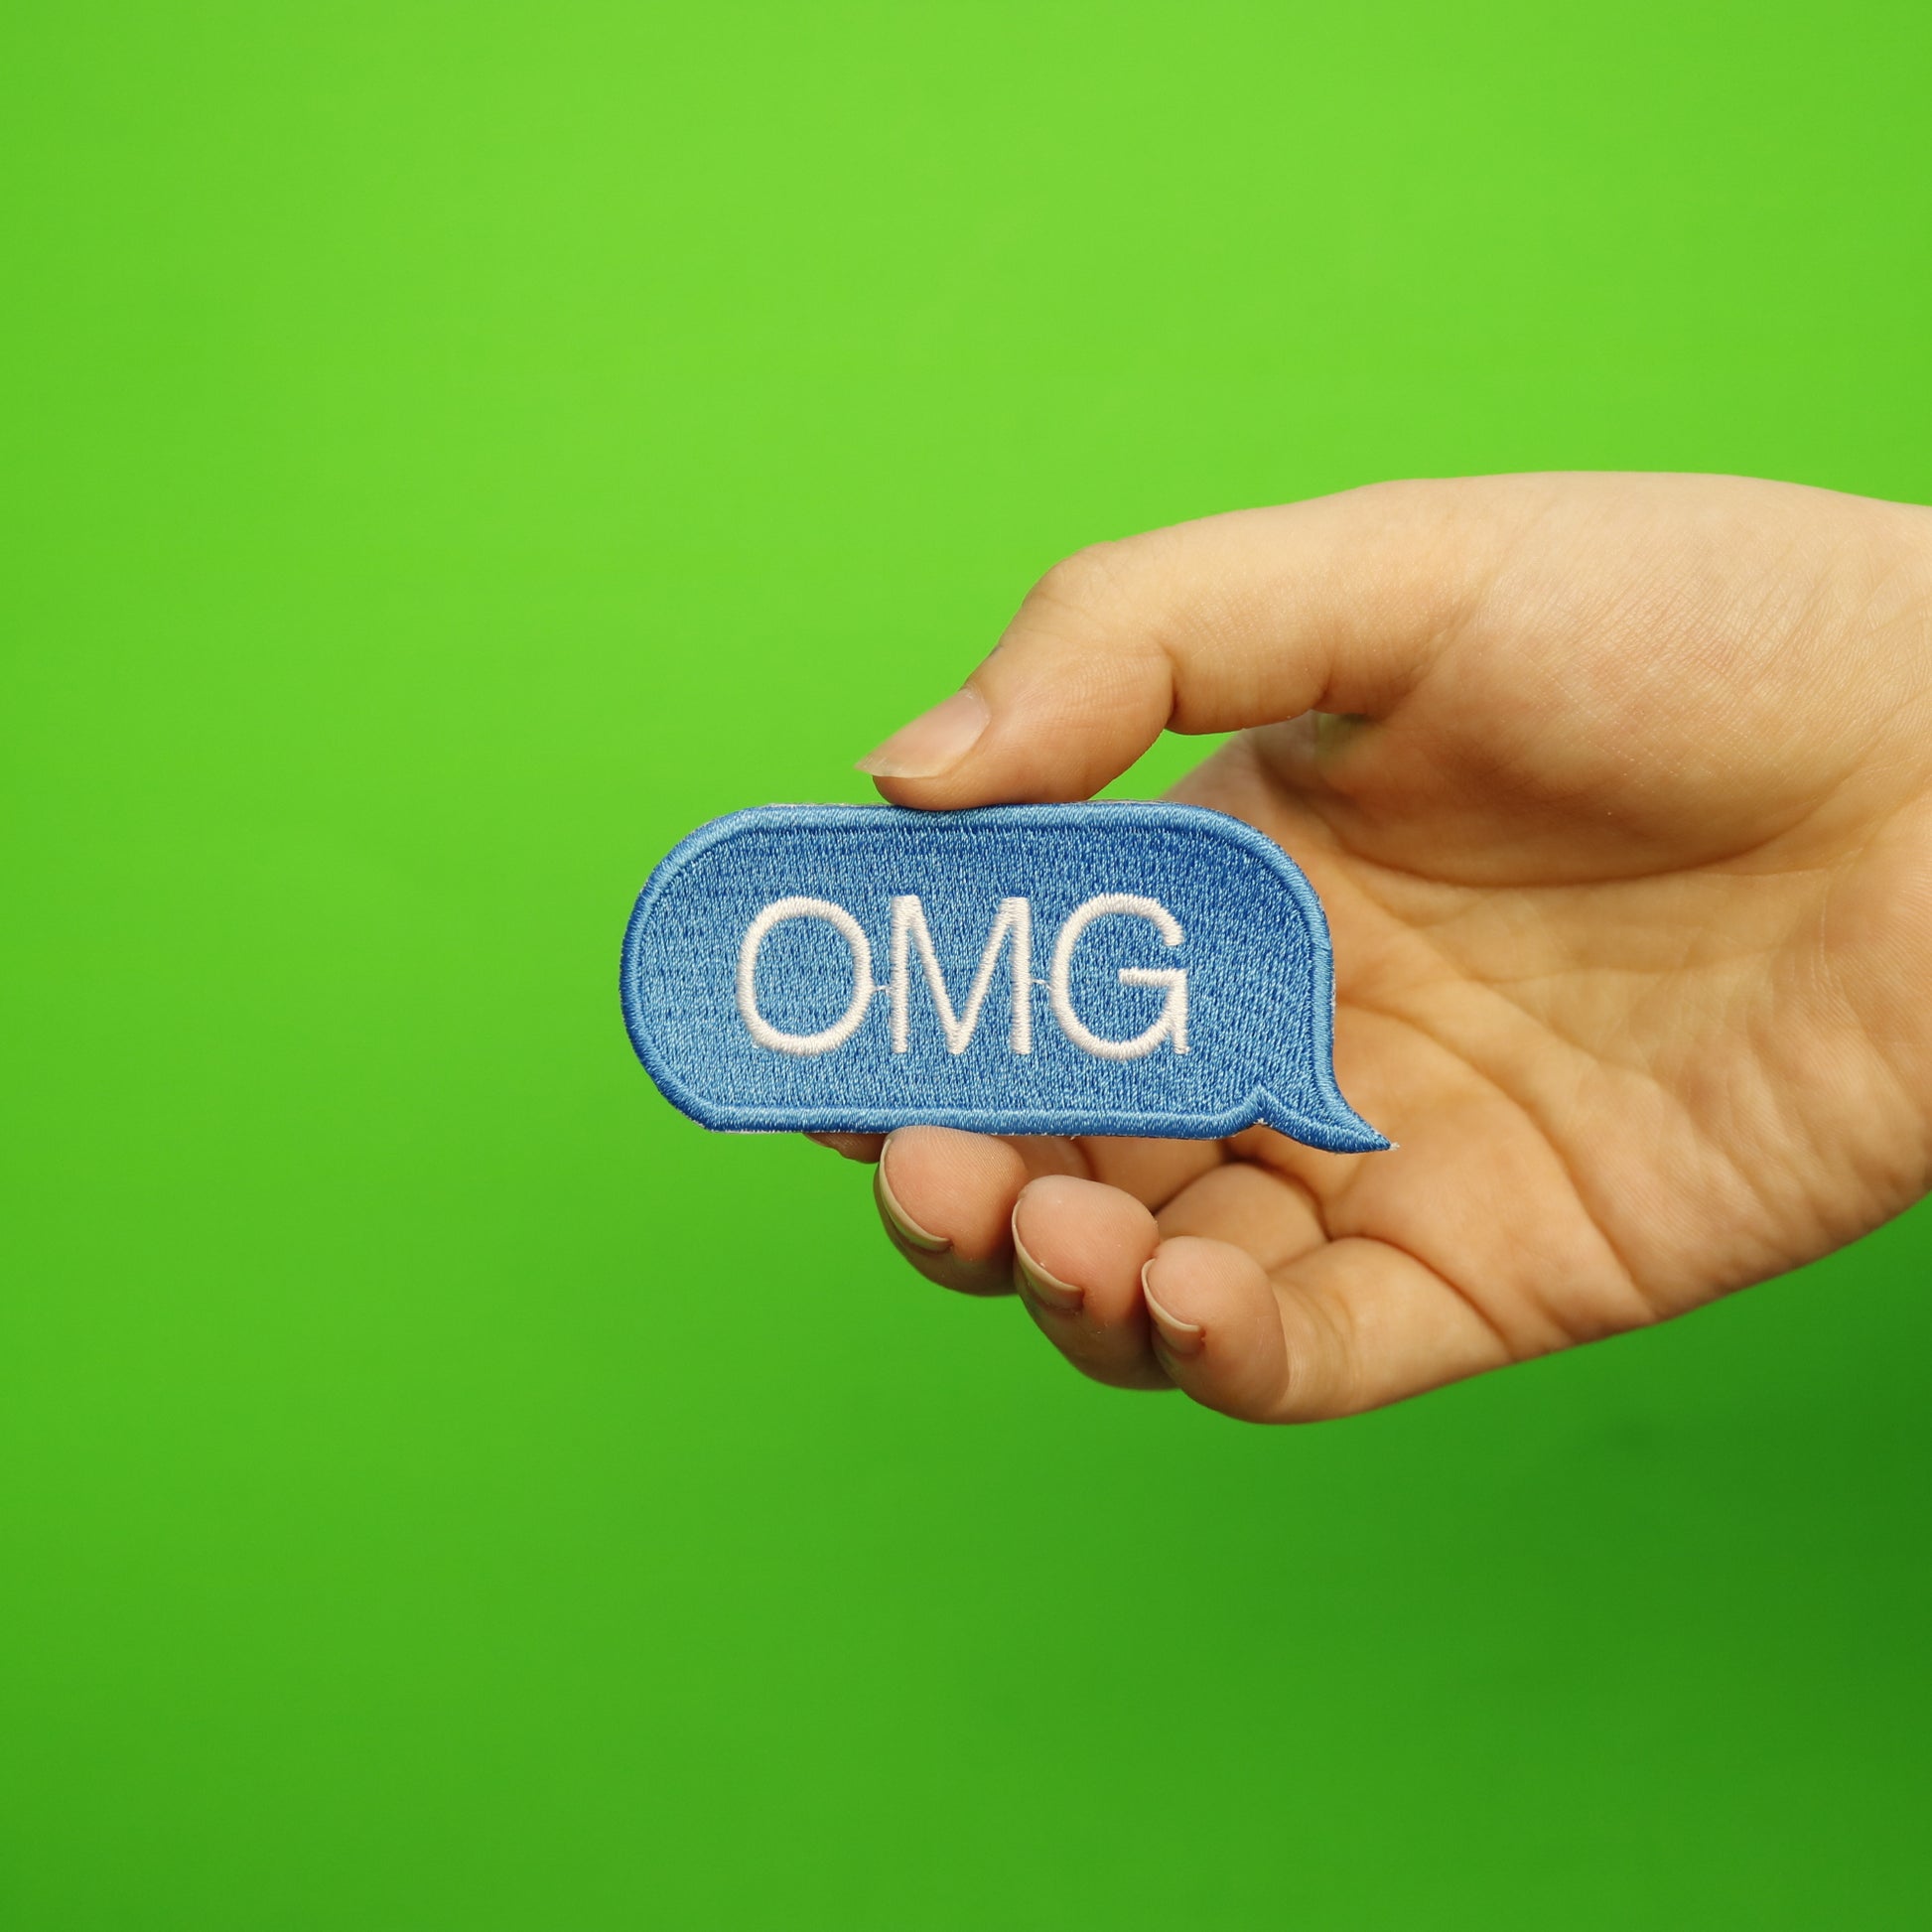 OMG Blue Text Bubble Embroidered Iron On Patch 